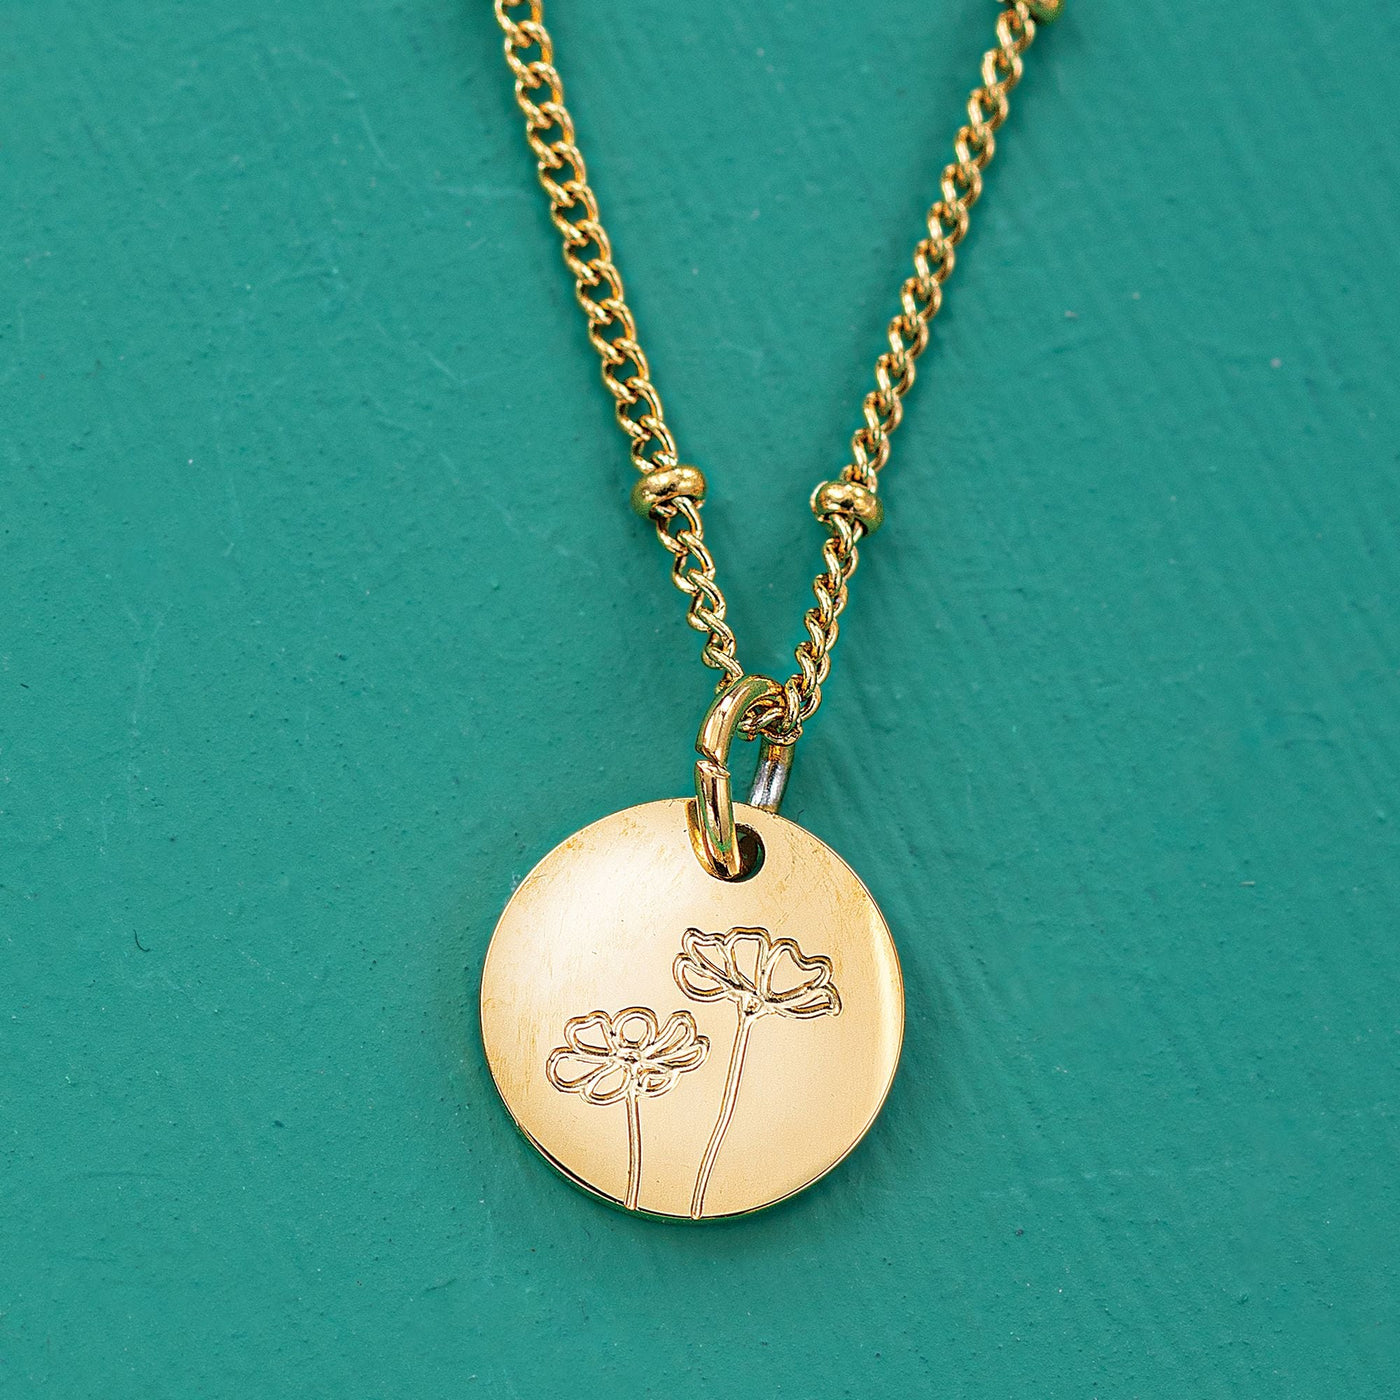 October Cosmos Birth Flower Charm Necklace